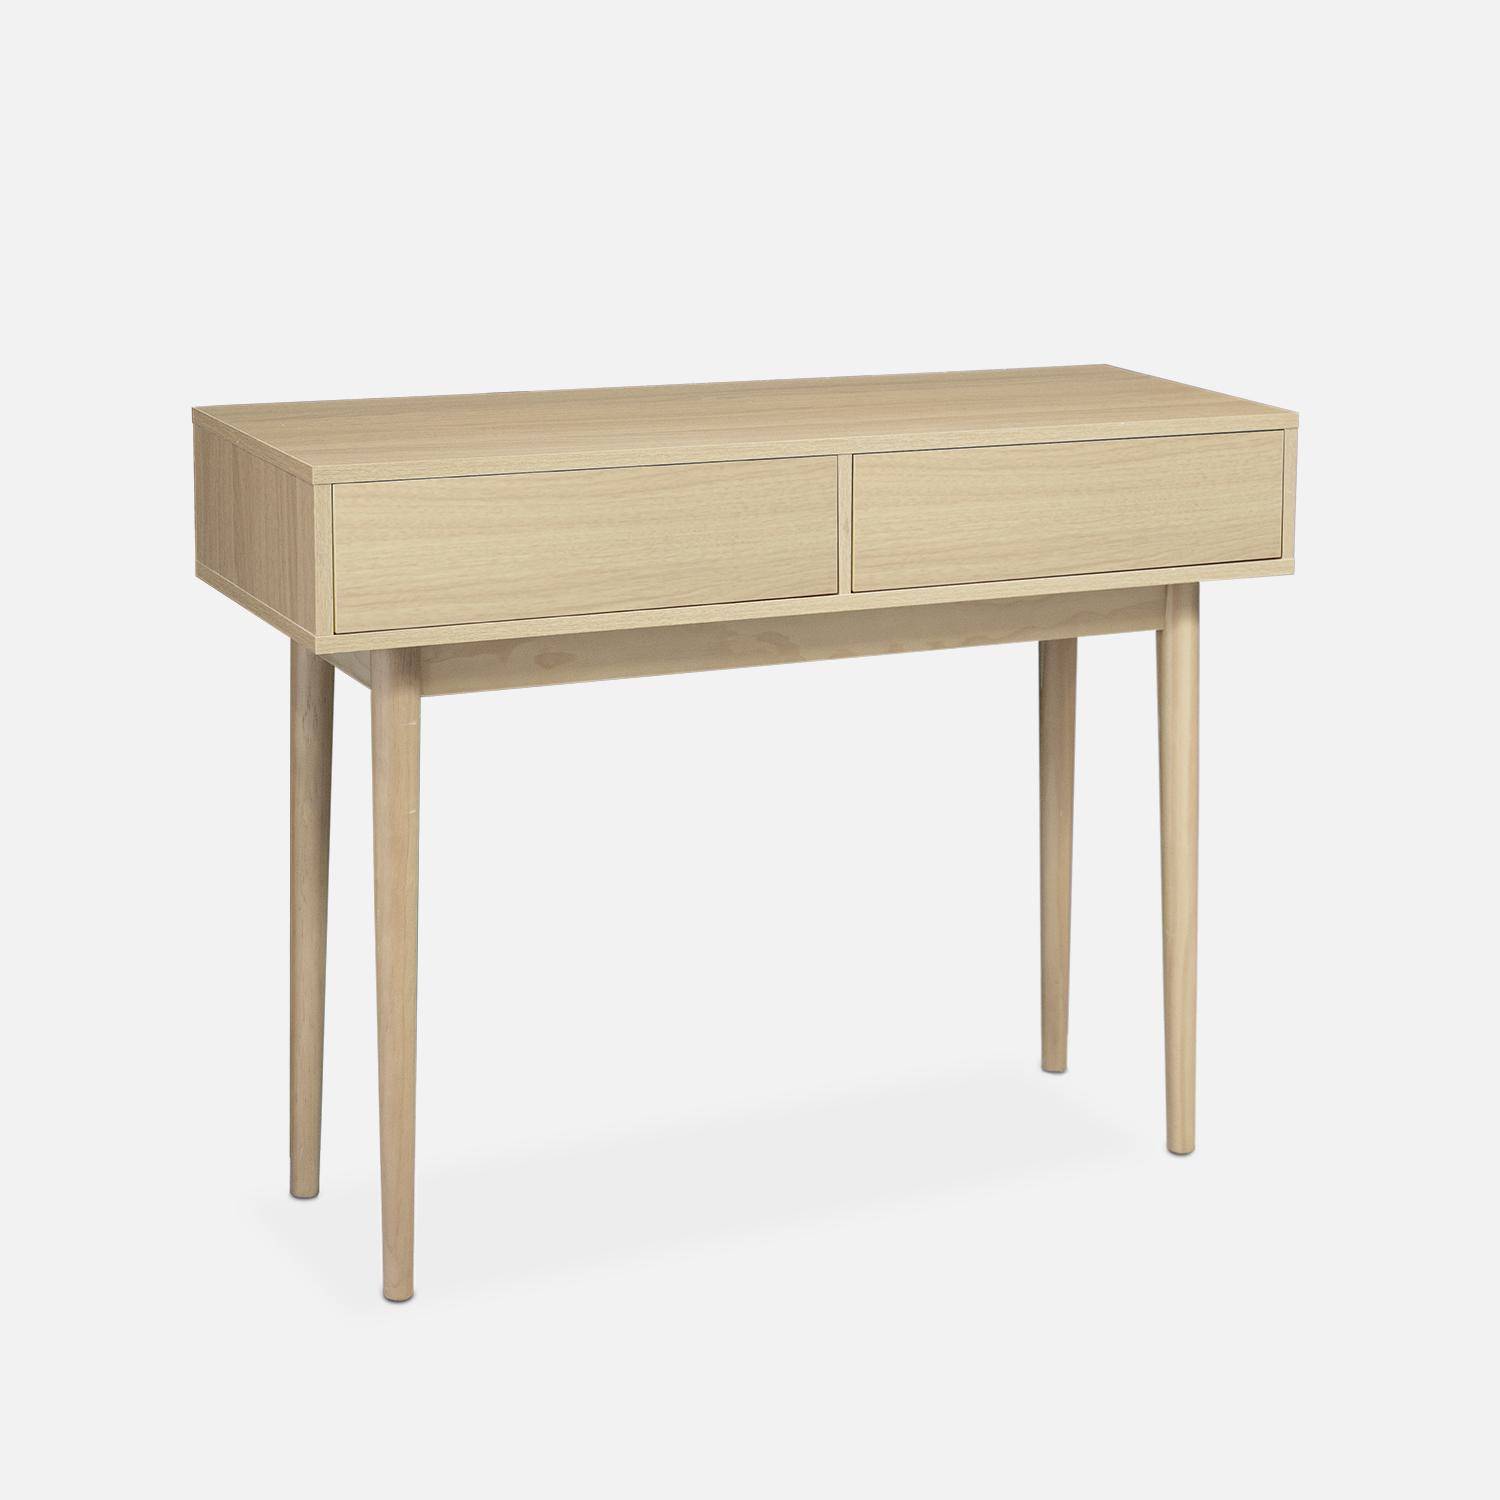 Wood-effect console table, 100x55x75cm, Mika, Natural wood colour Photo3